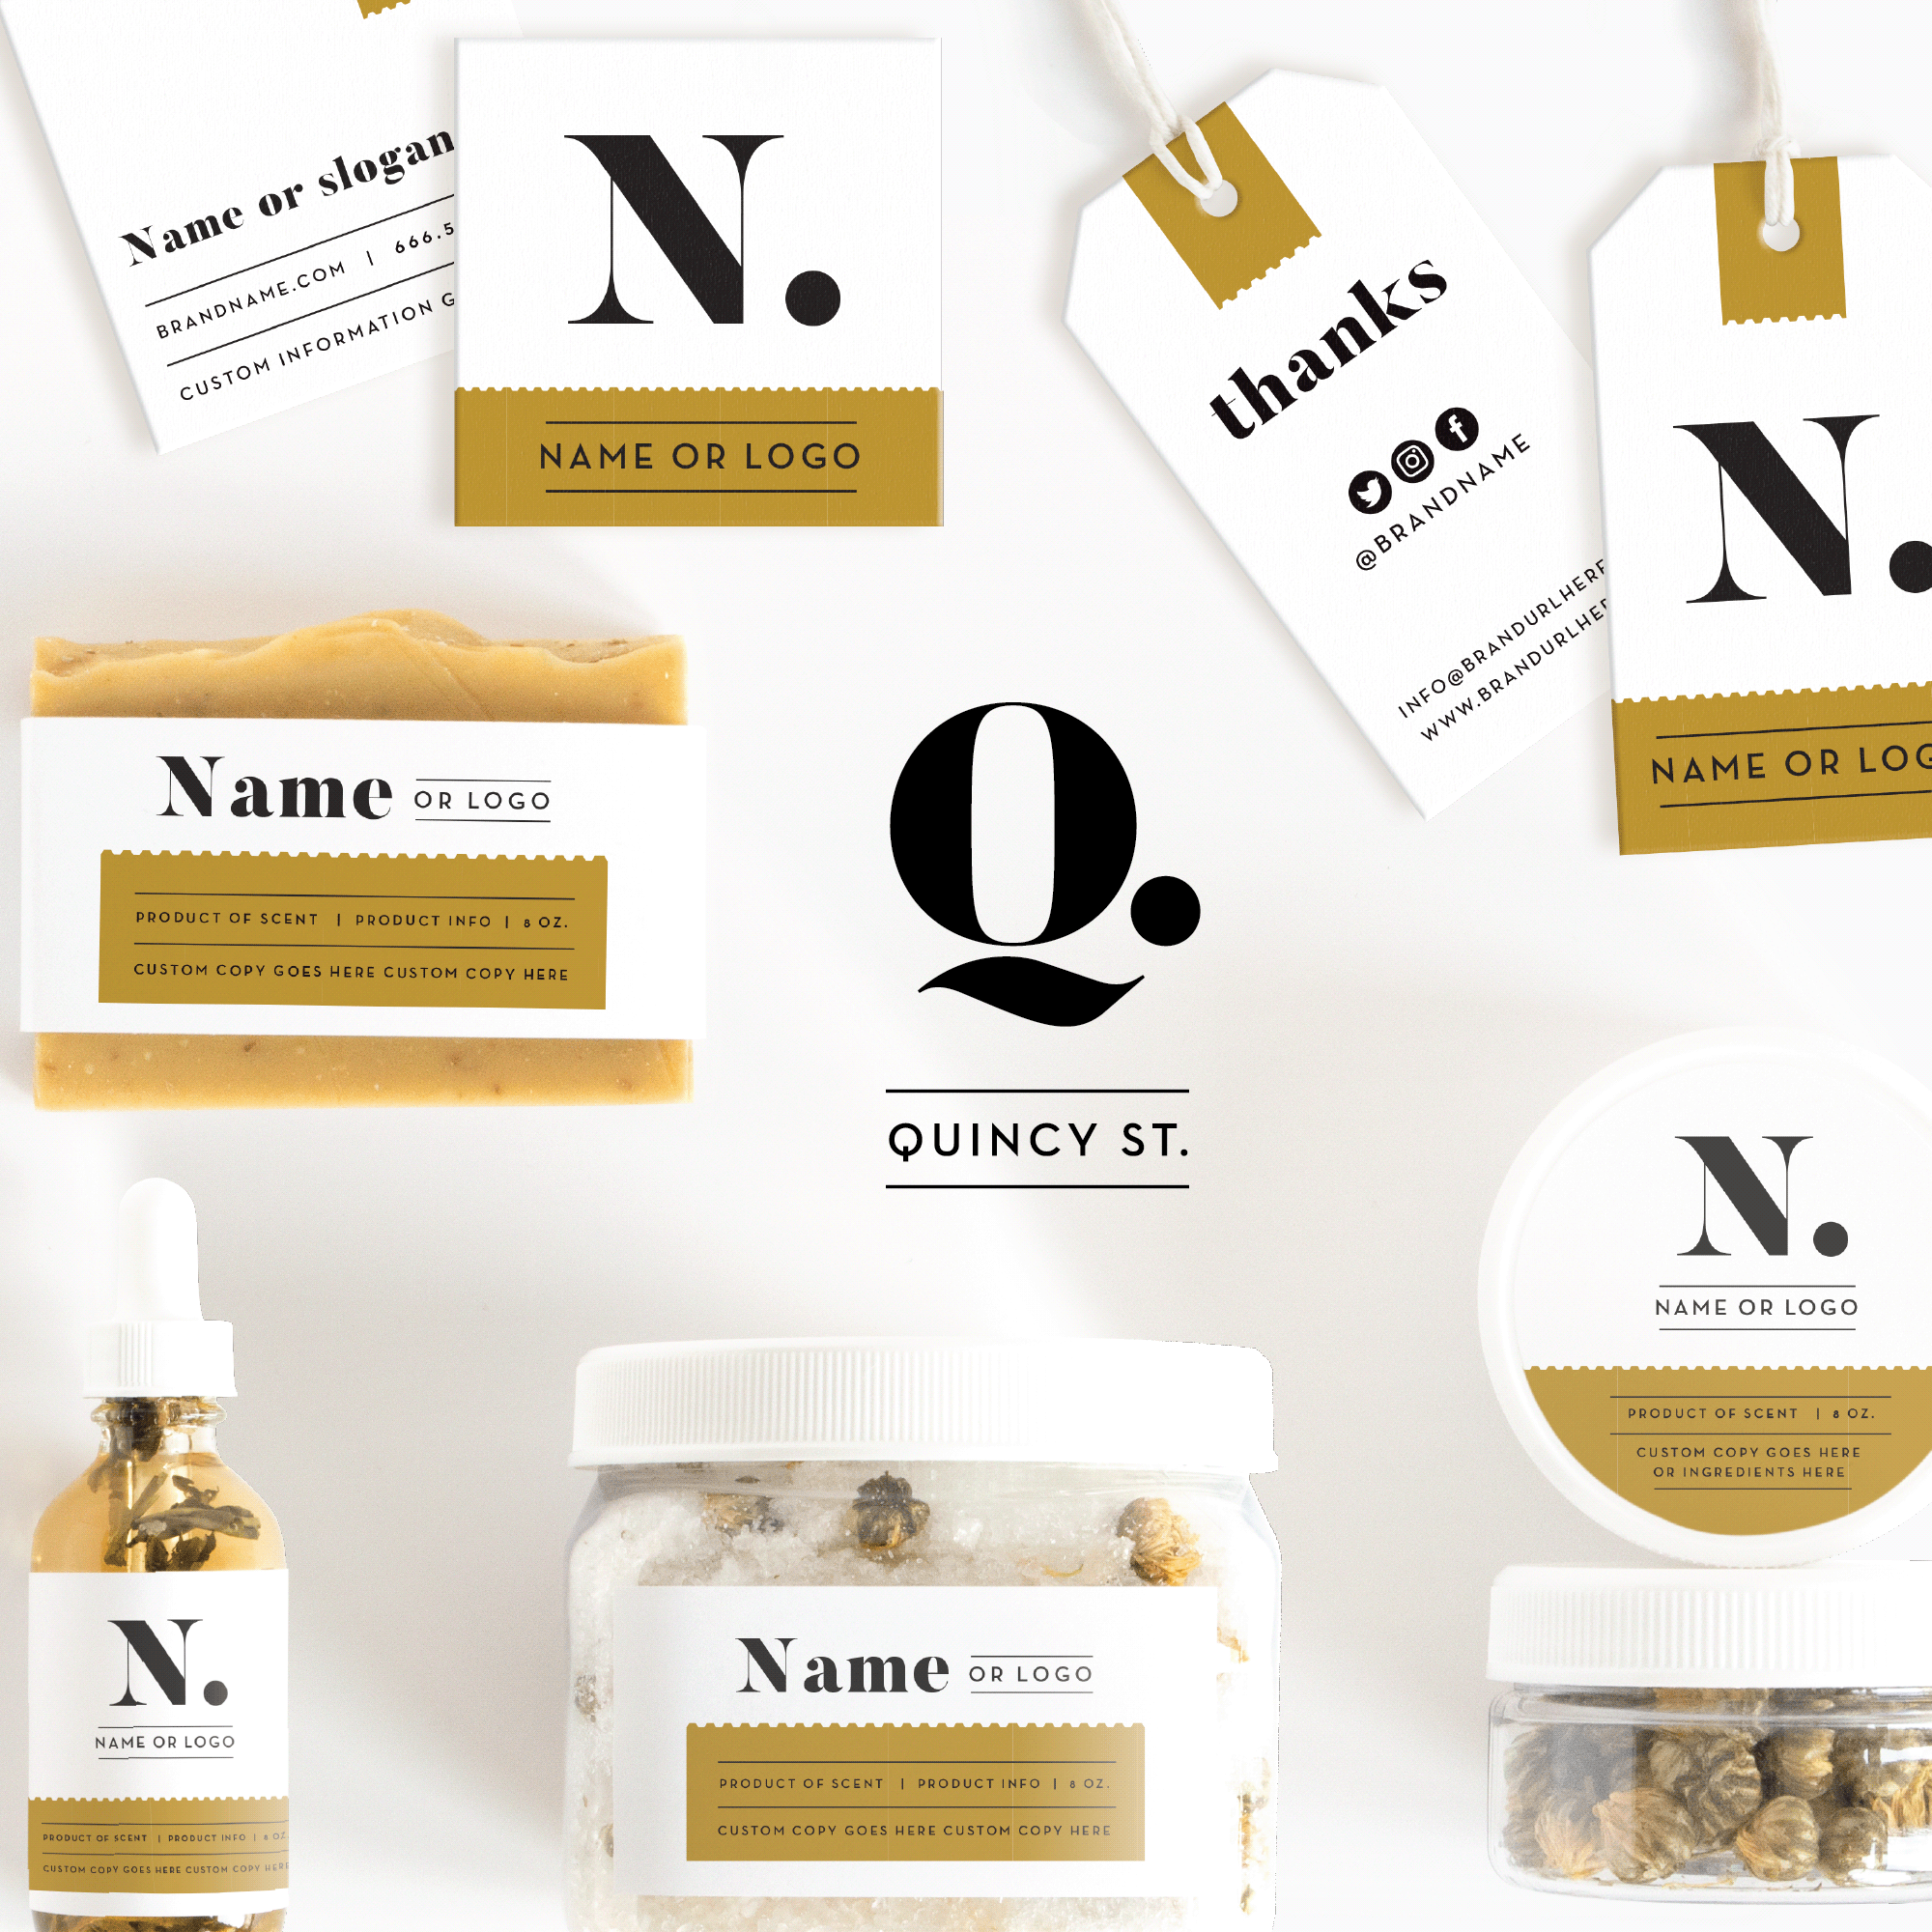 Quincy Street Square Product Label